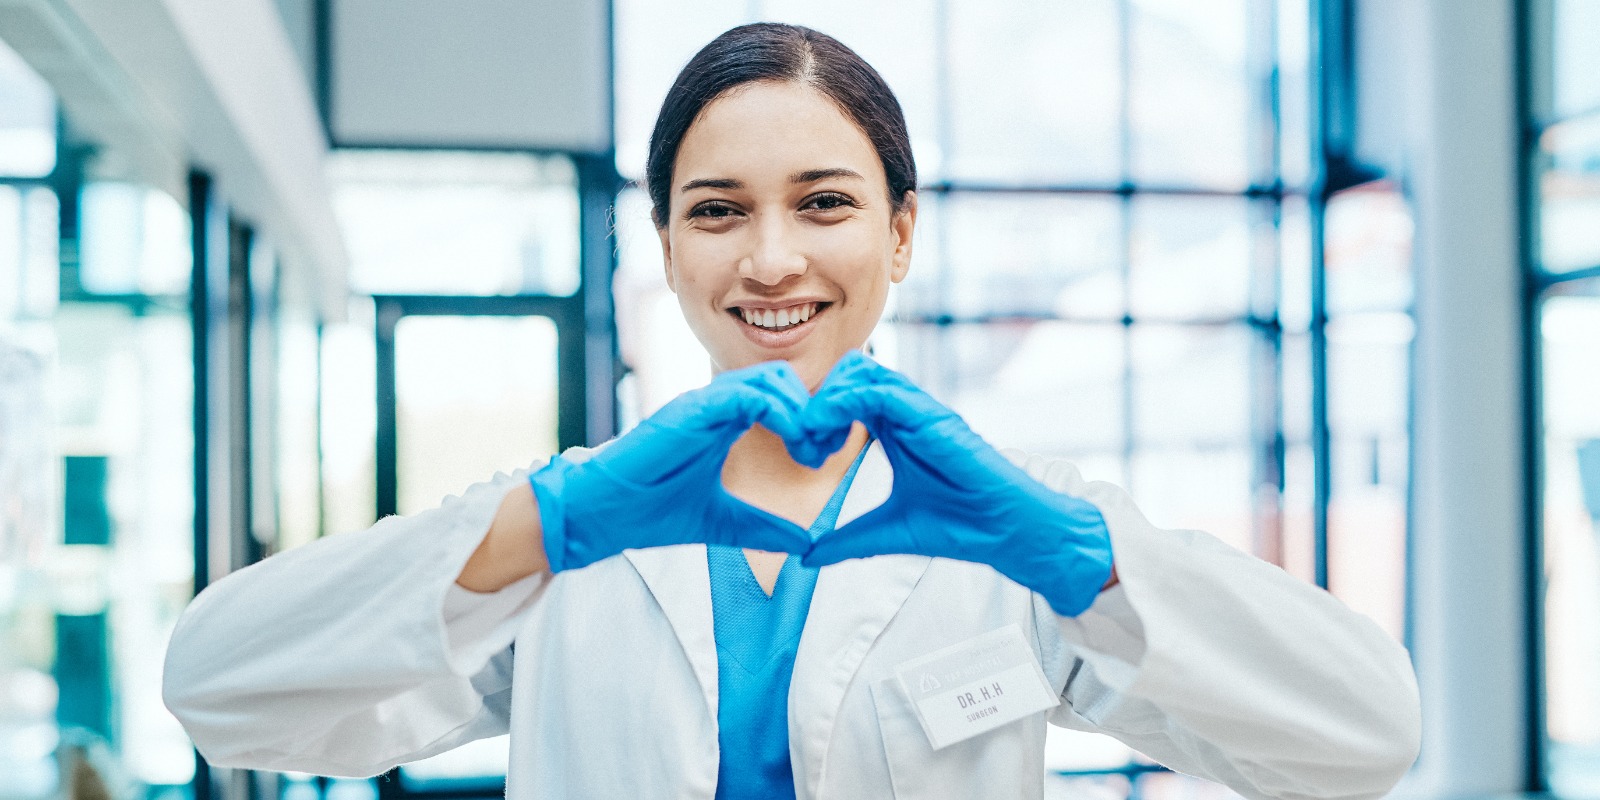 Doctor making the shape of a heart with her hands